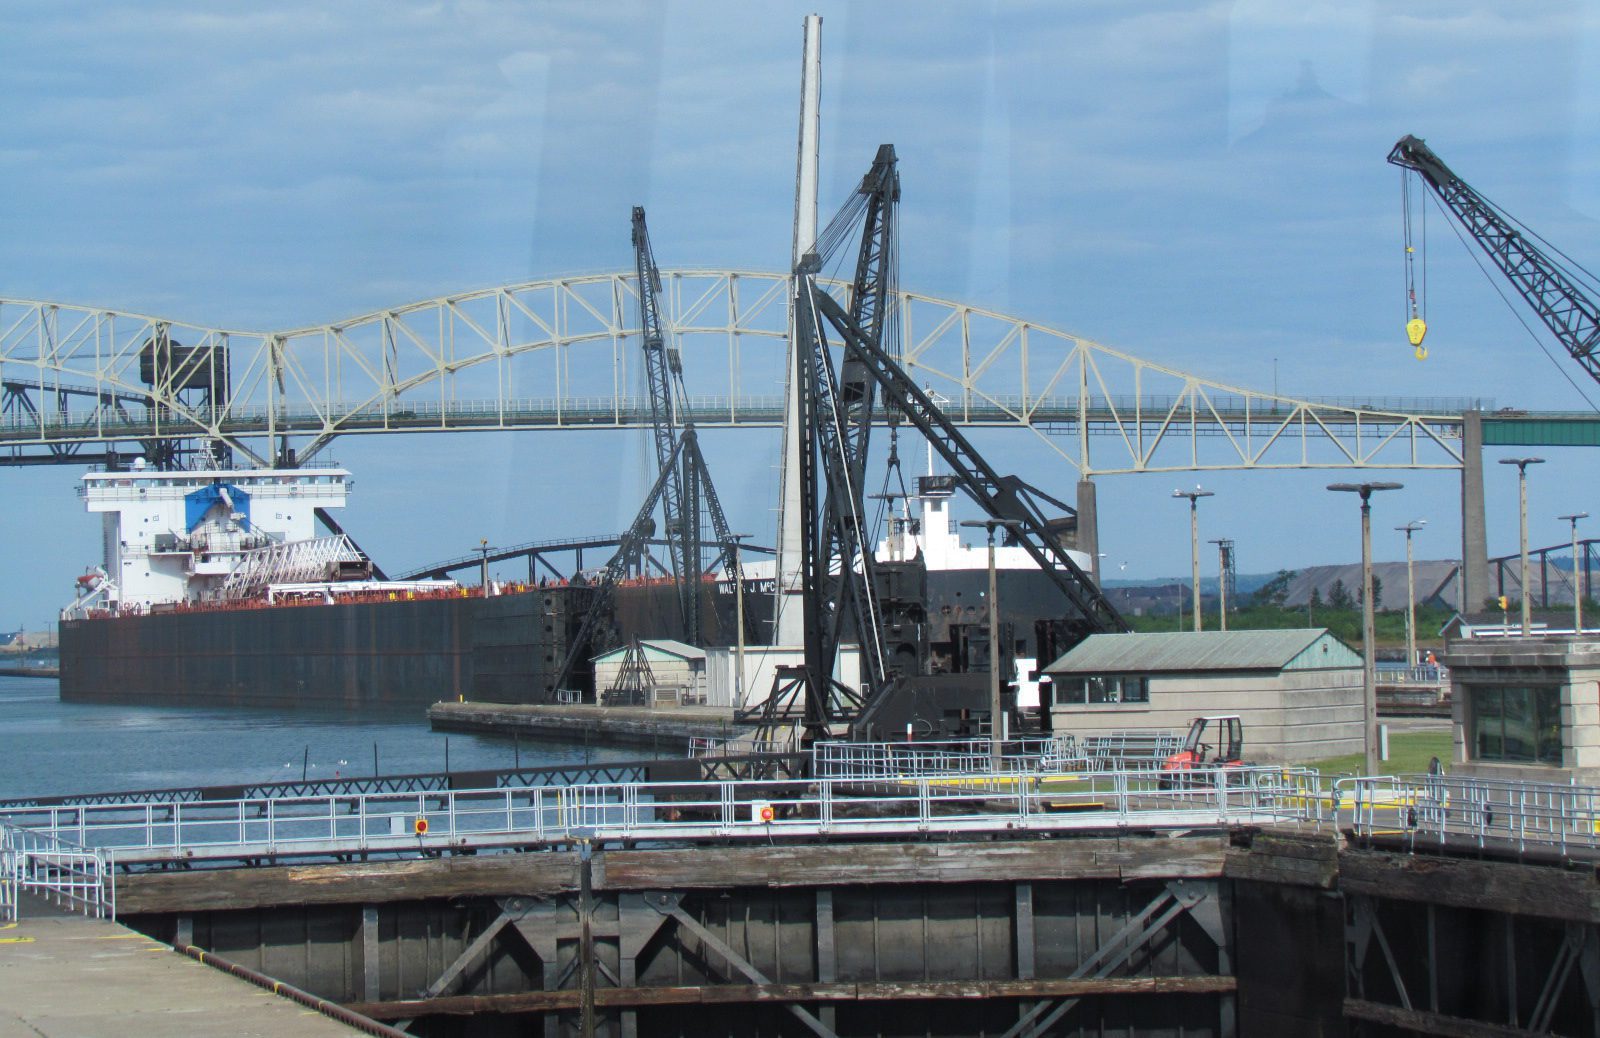 Mate Killed in Accident on Great Lakes Bulk Carrier -Report